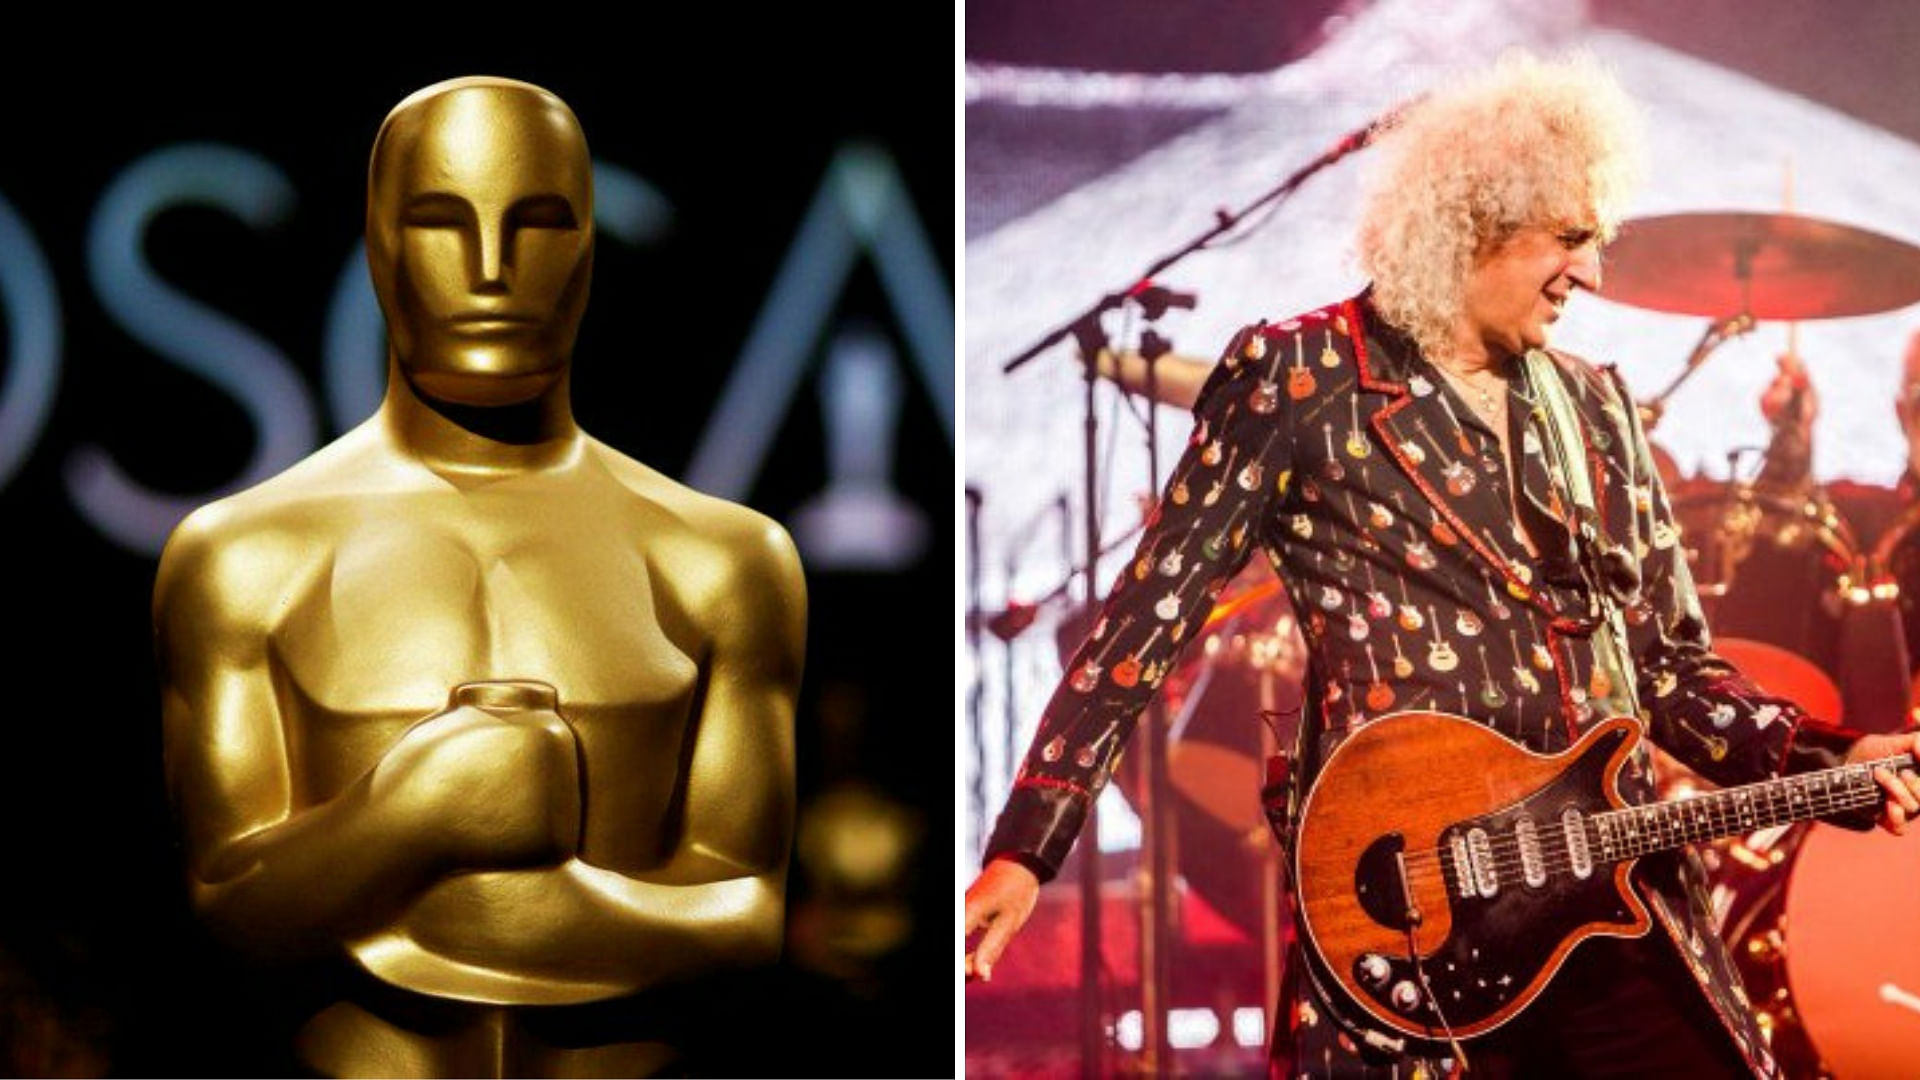 Queen will perform at the Oscars this weekend.